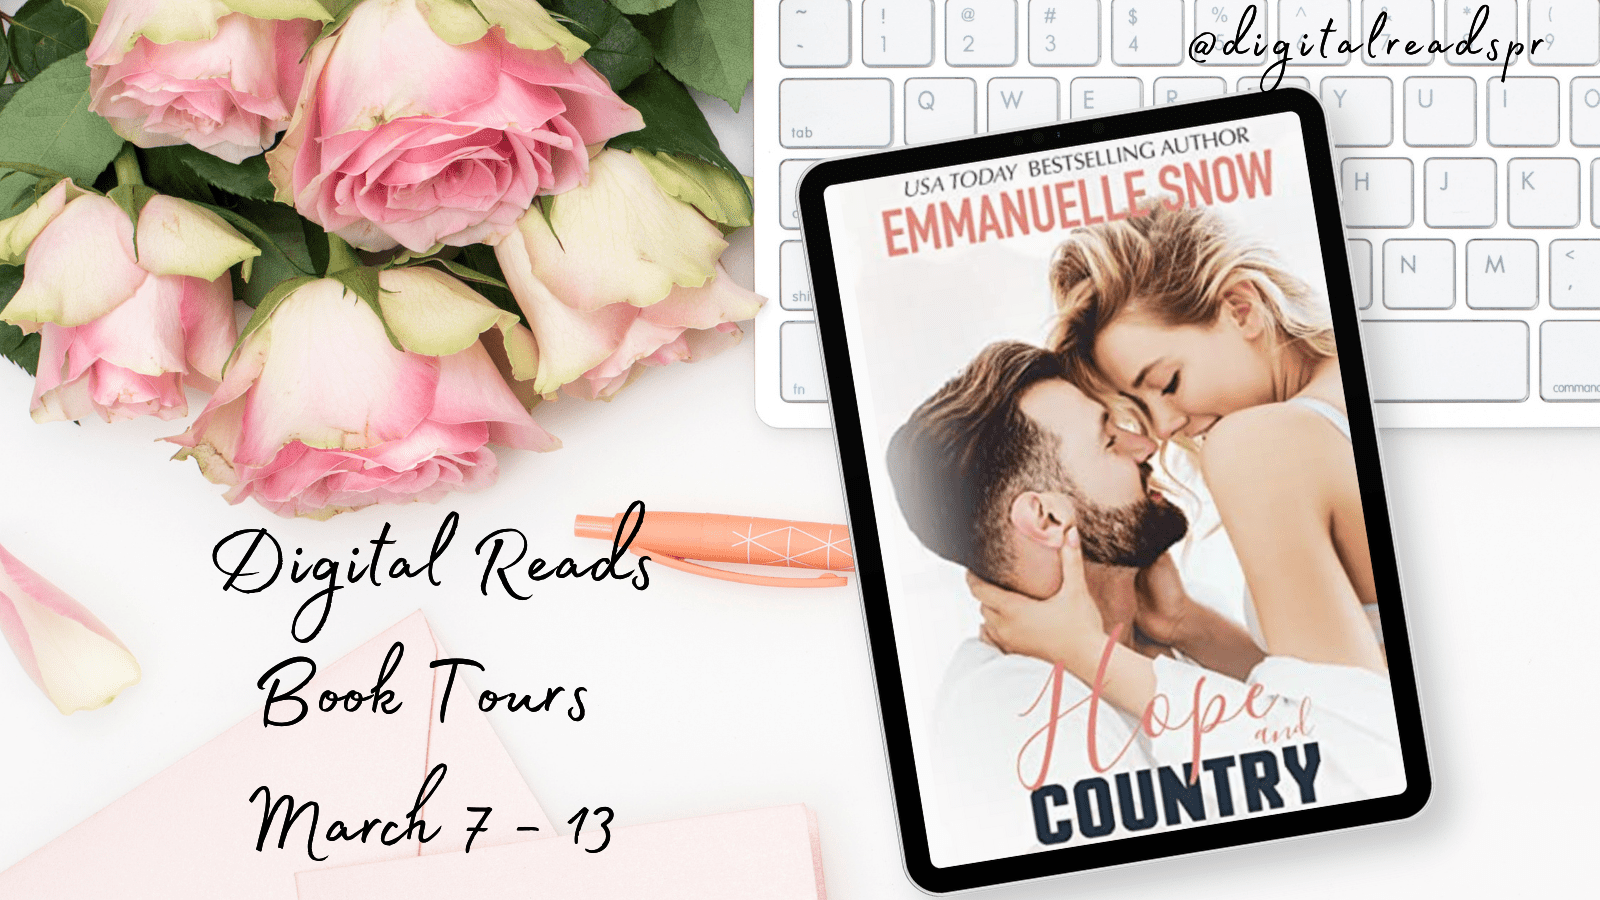 Hope and Country by Emmanuelle Snow | Carter Hills Band Series | Review